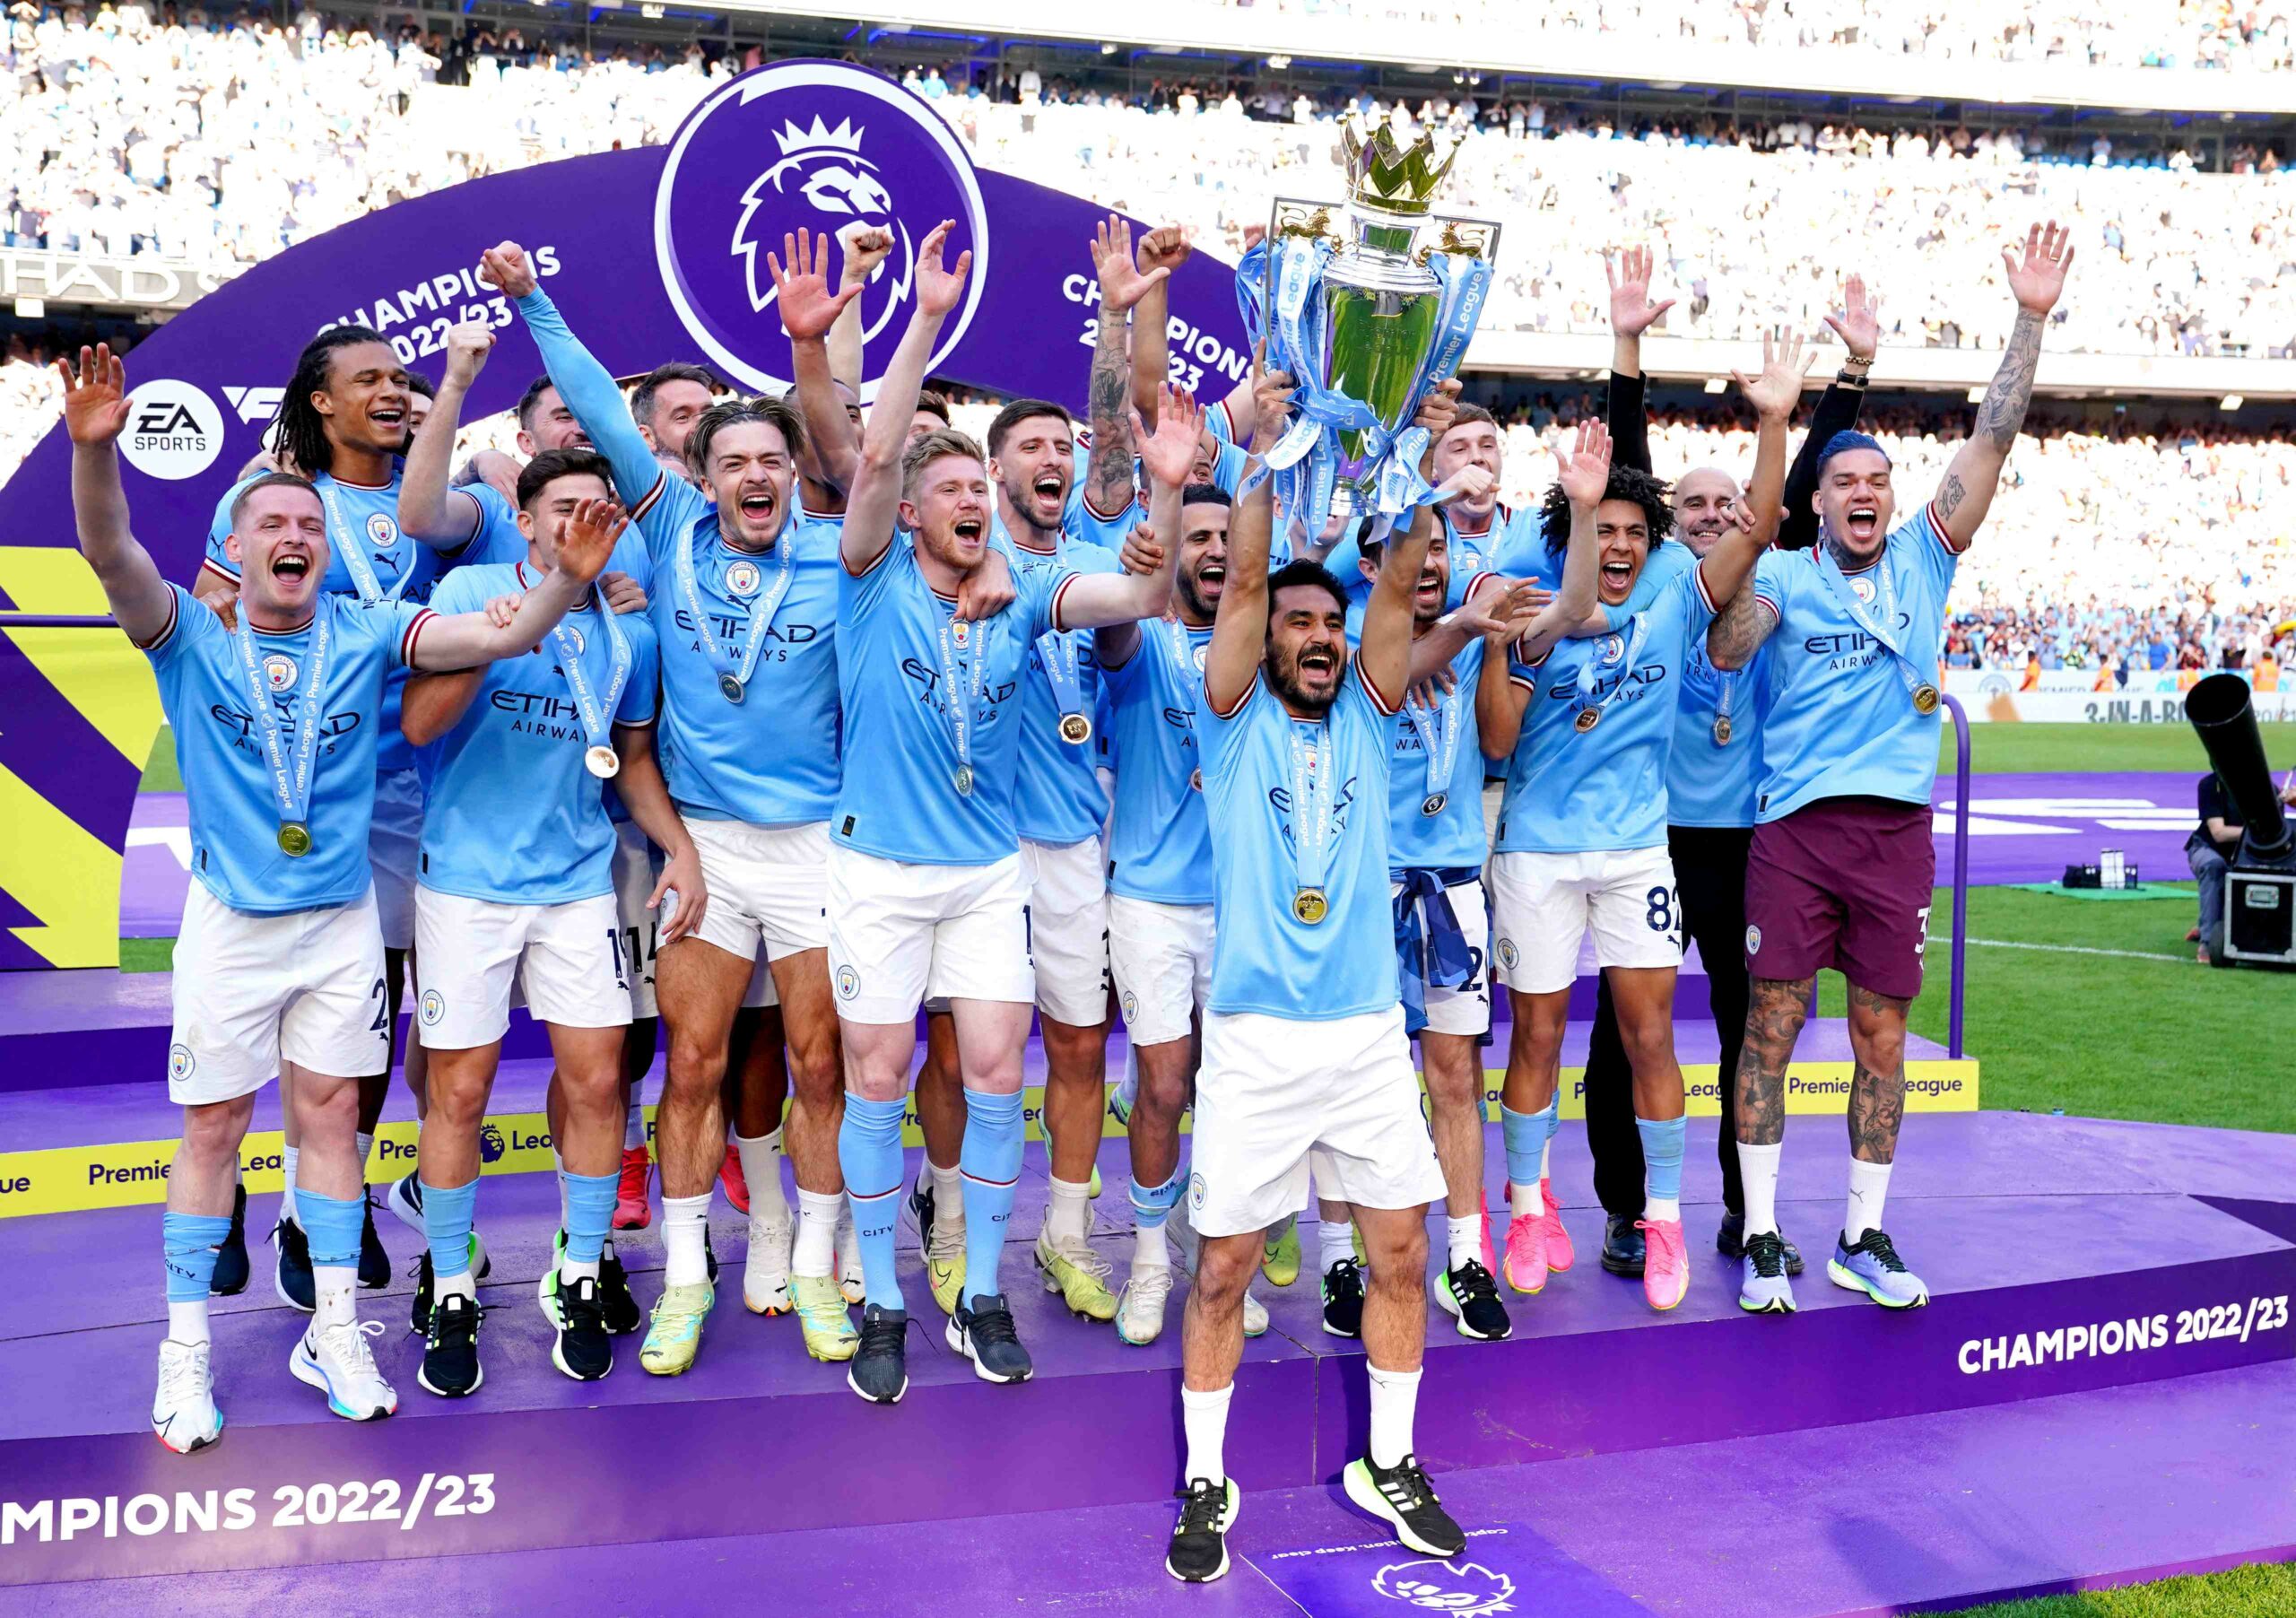 Manchester City players and staff celebrating their victory with the EPL trophy in front of jubilant fans at the Etihad Stadium, marking their triumph in the 2022-23 season.